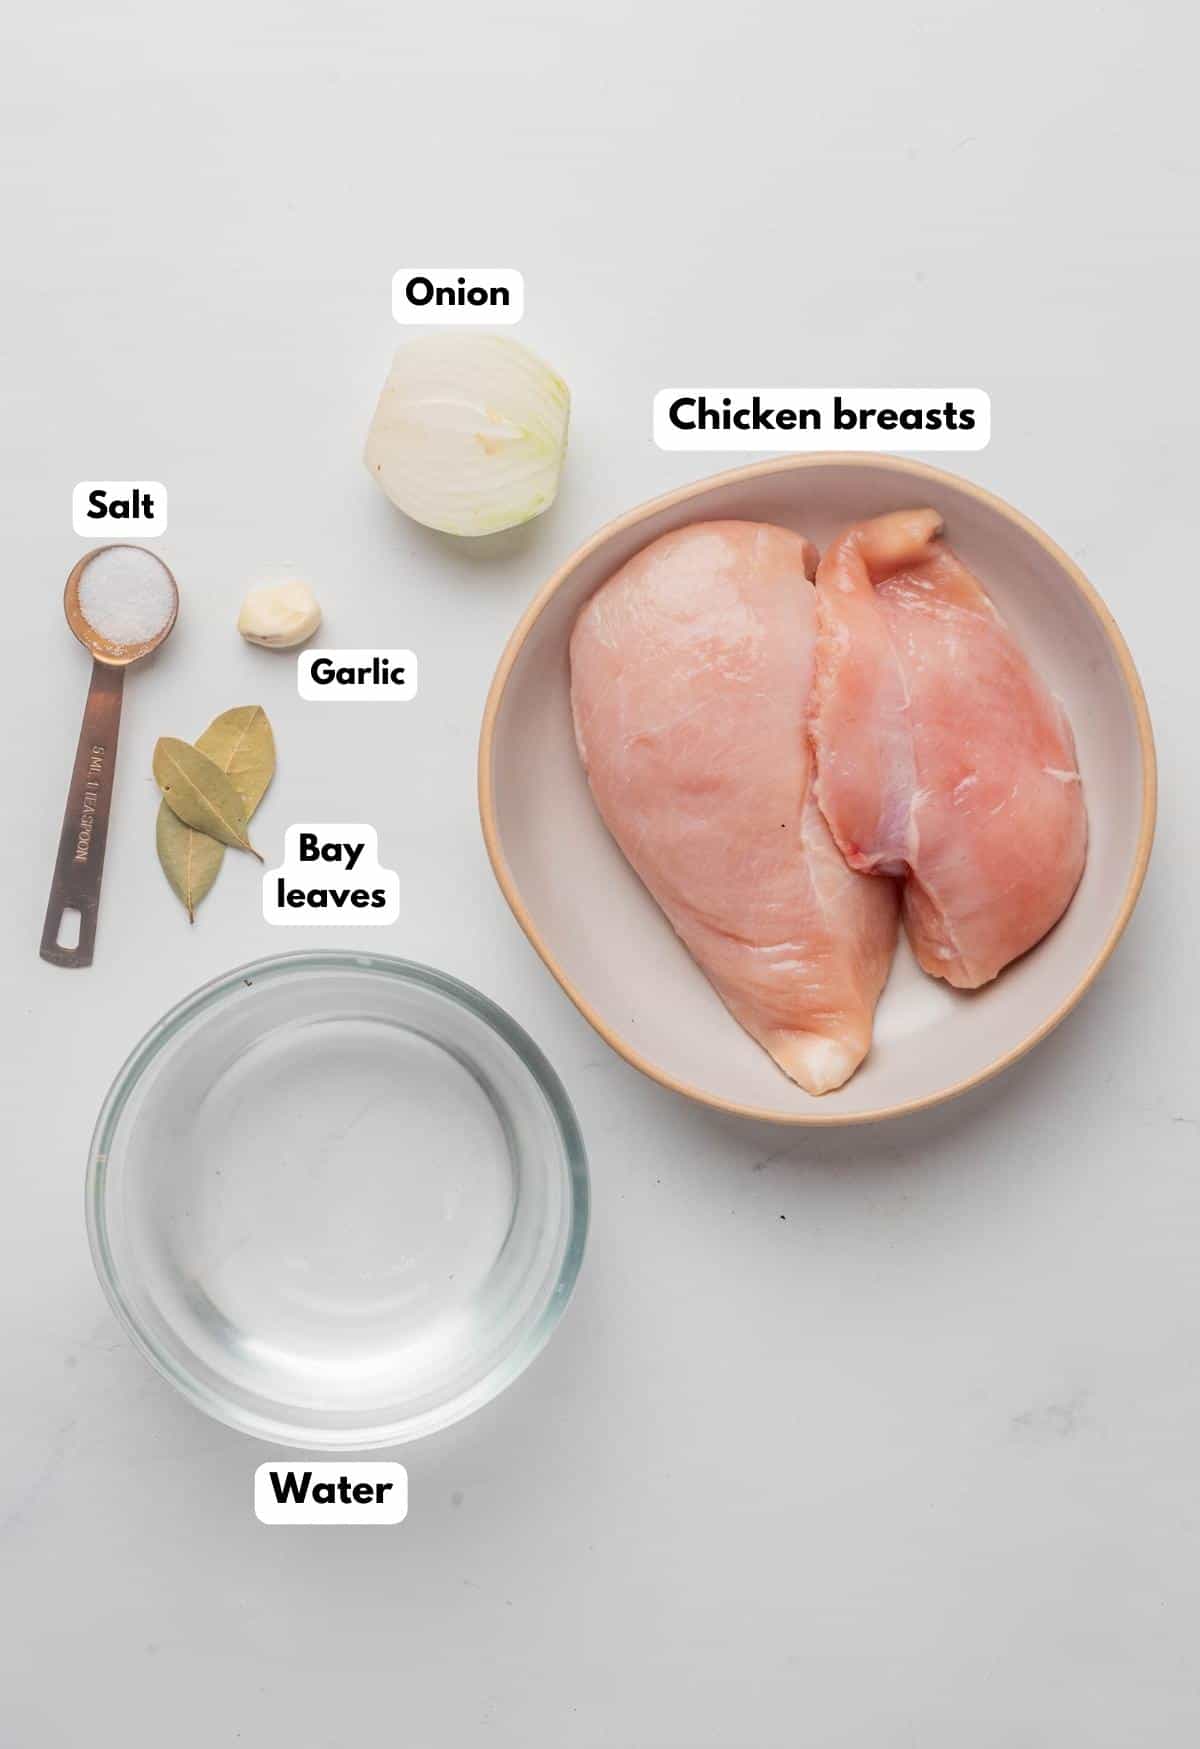 The ingredients needed to make the chicken soup.